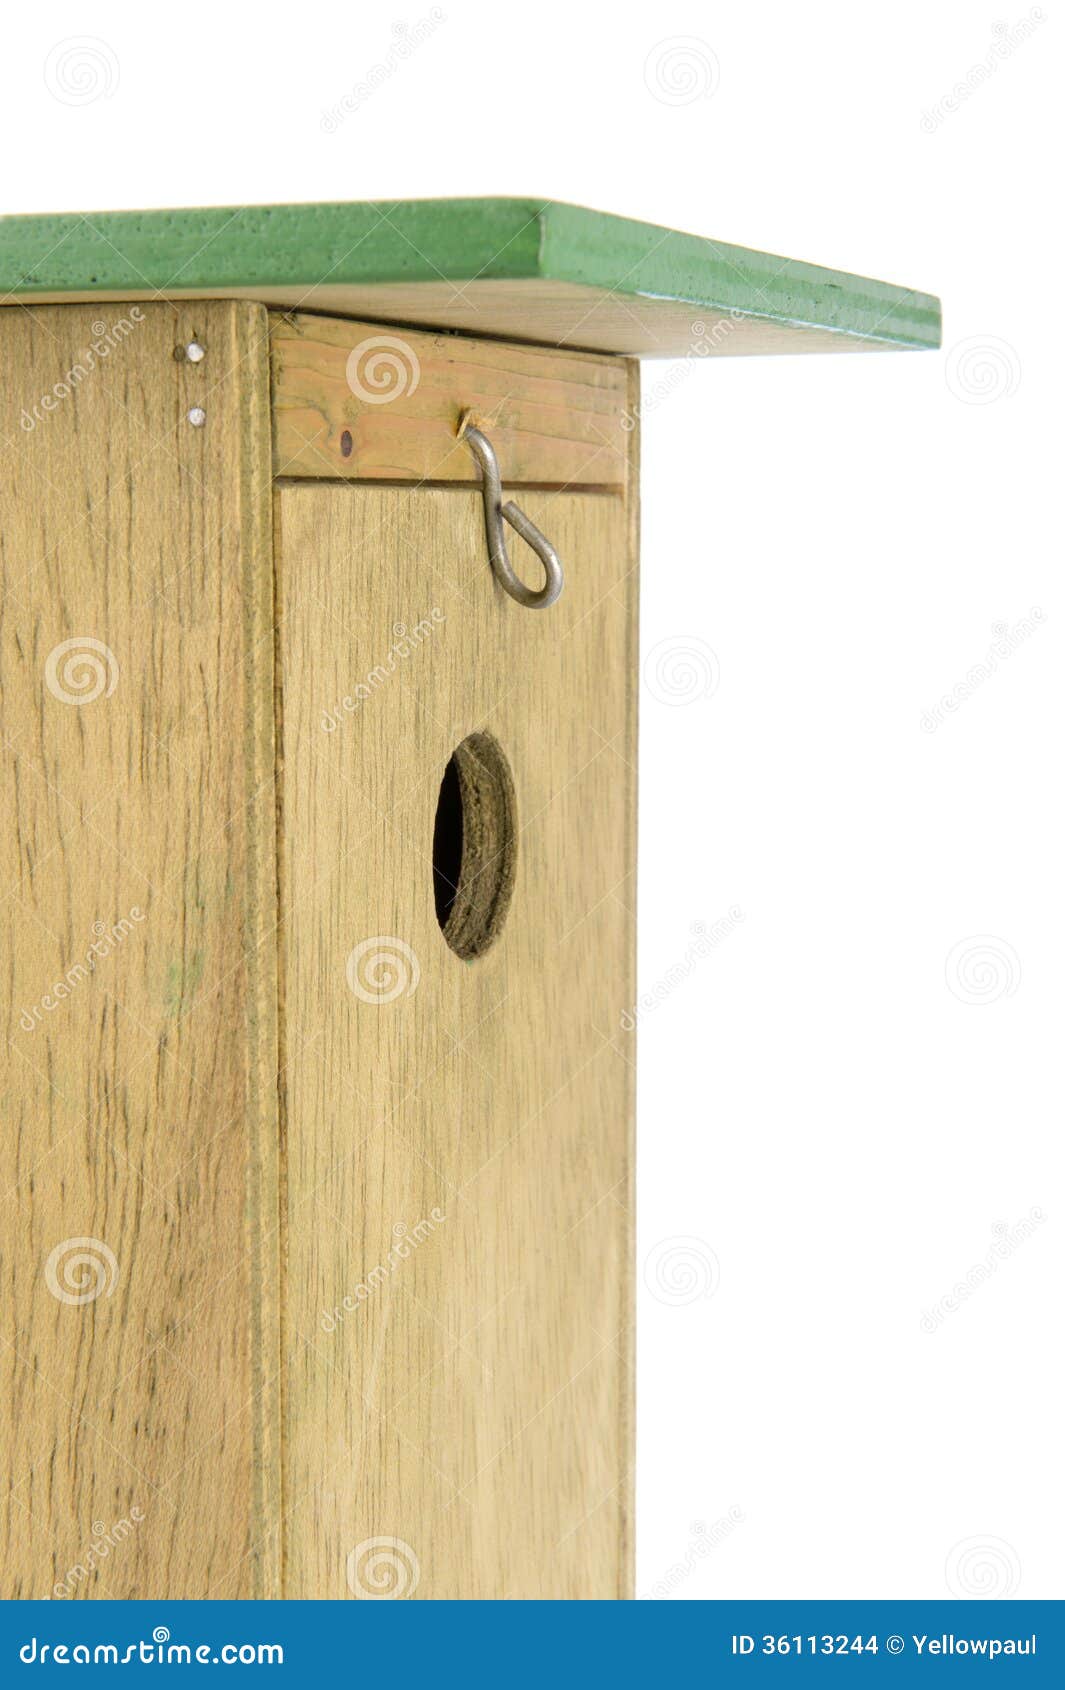 Wooden Nesting Box In Closeup Stock Photo - Image of house 